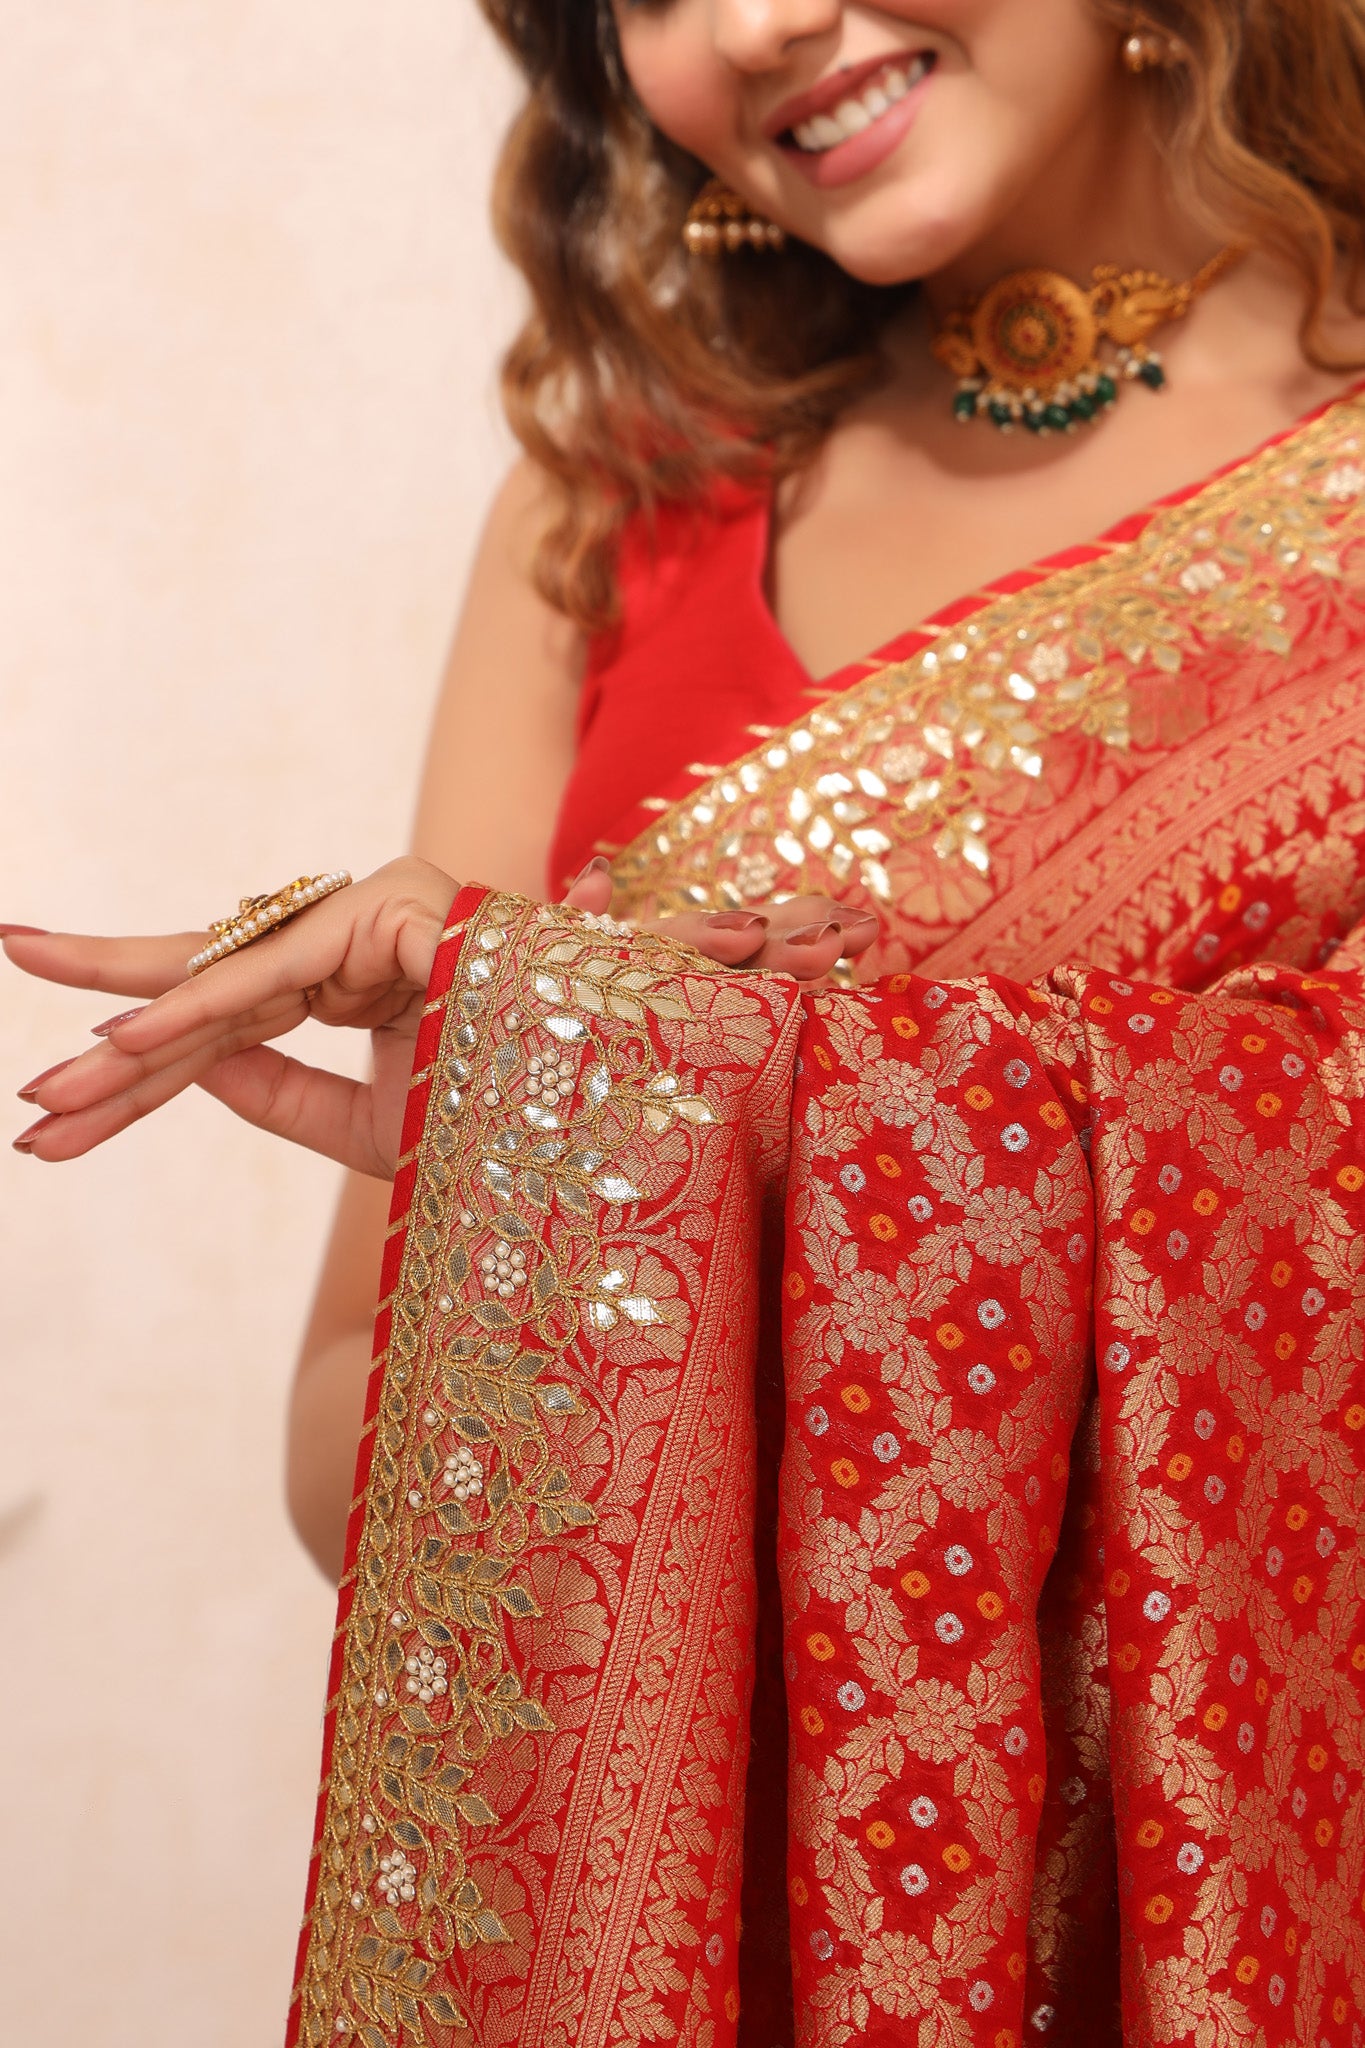 Buy beautiful red bandhej Banarasi saree online in USA with gota patti border. Make a fashion statement at weddings with stunning designer sarees, embroidered sarees with blouse, wedding sarees, handloom sarees from Pure Elegance Indian fashion store in USA.-details